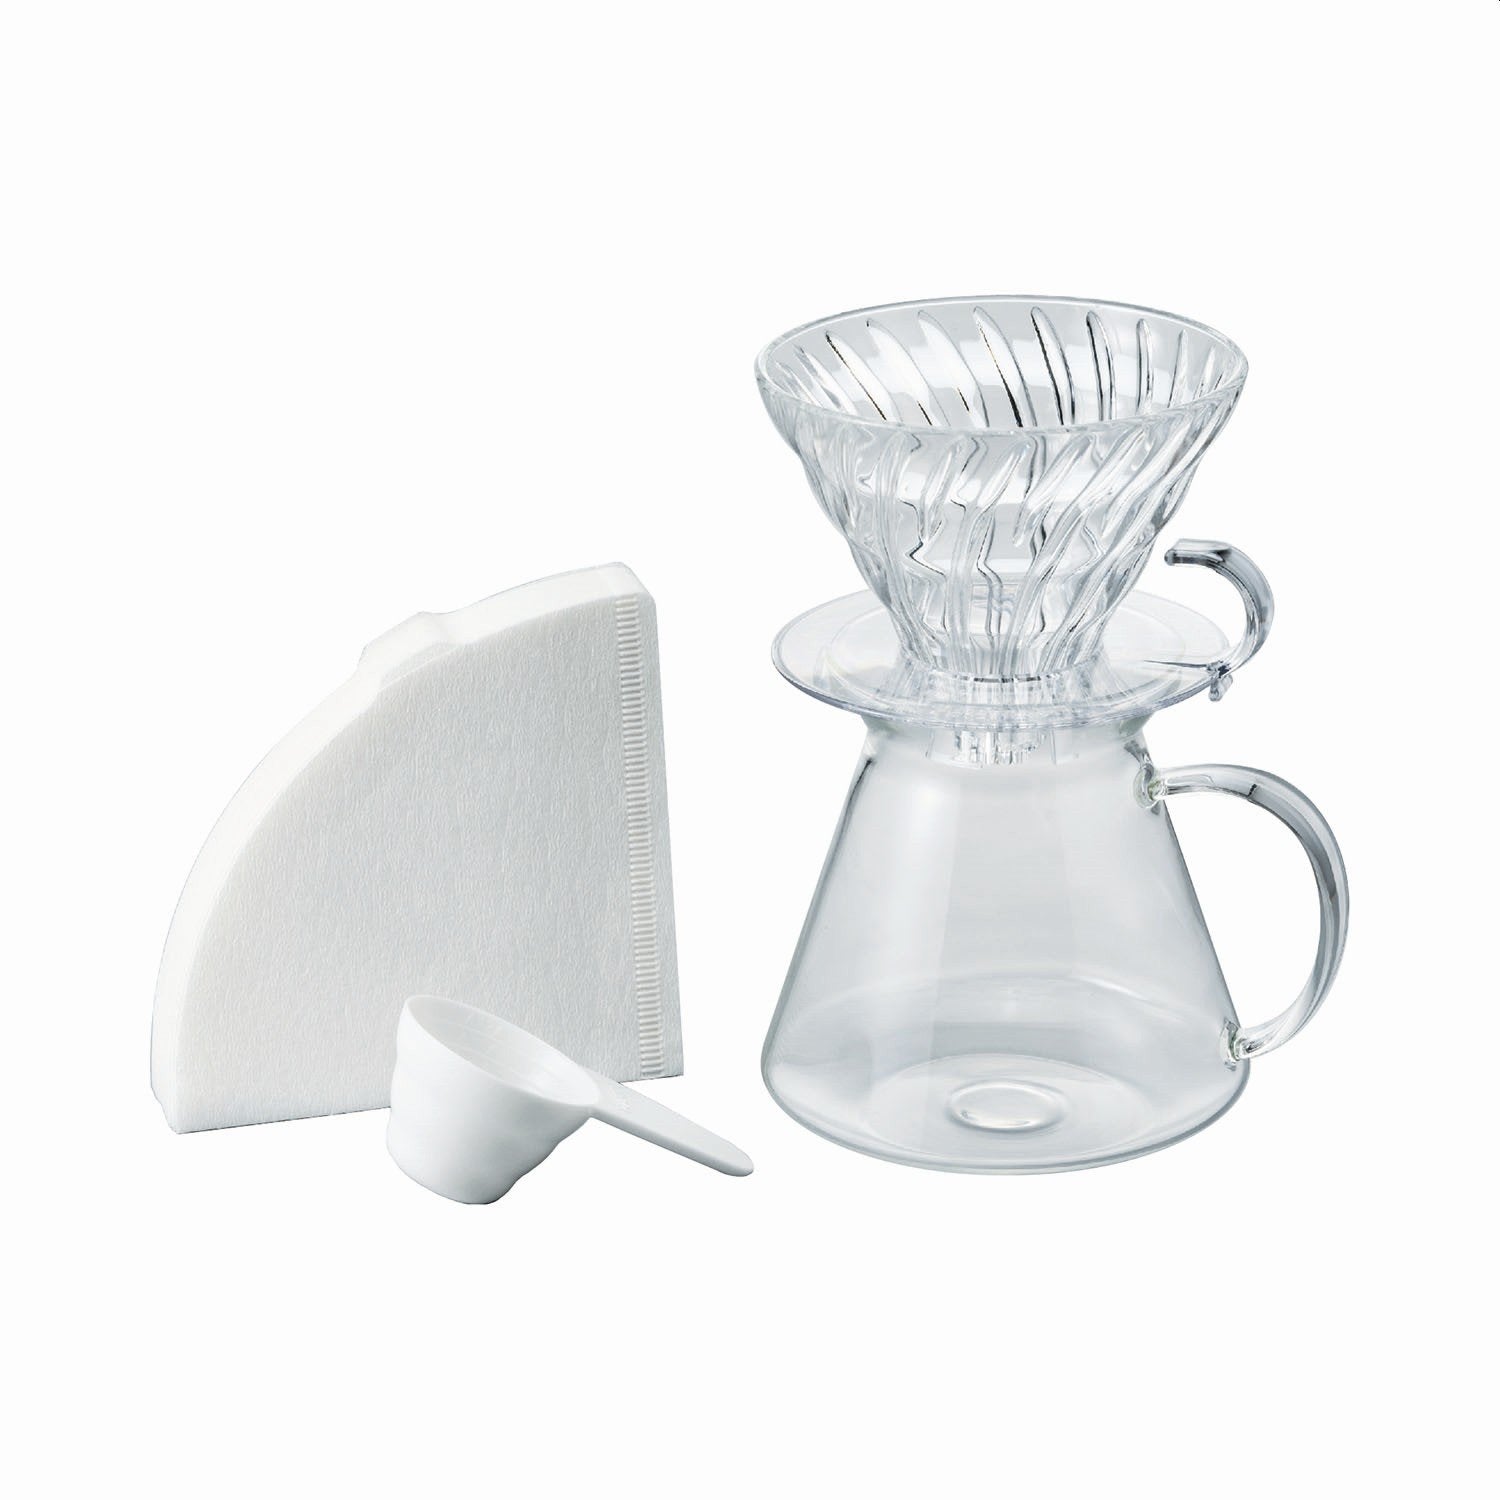 Simply Hario V60 Glass Brewing Kit With Free Coffee Beans Best Coffee